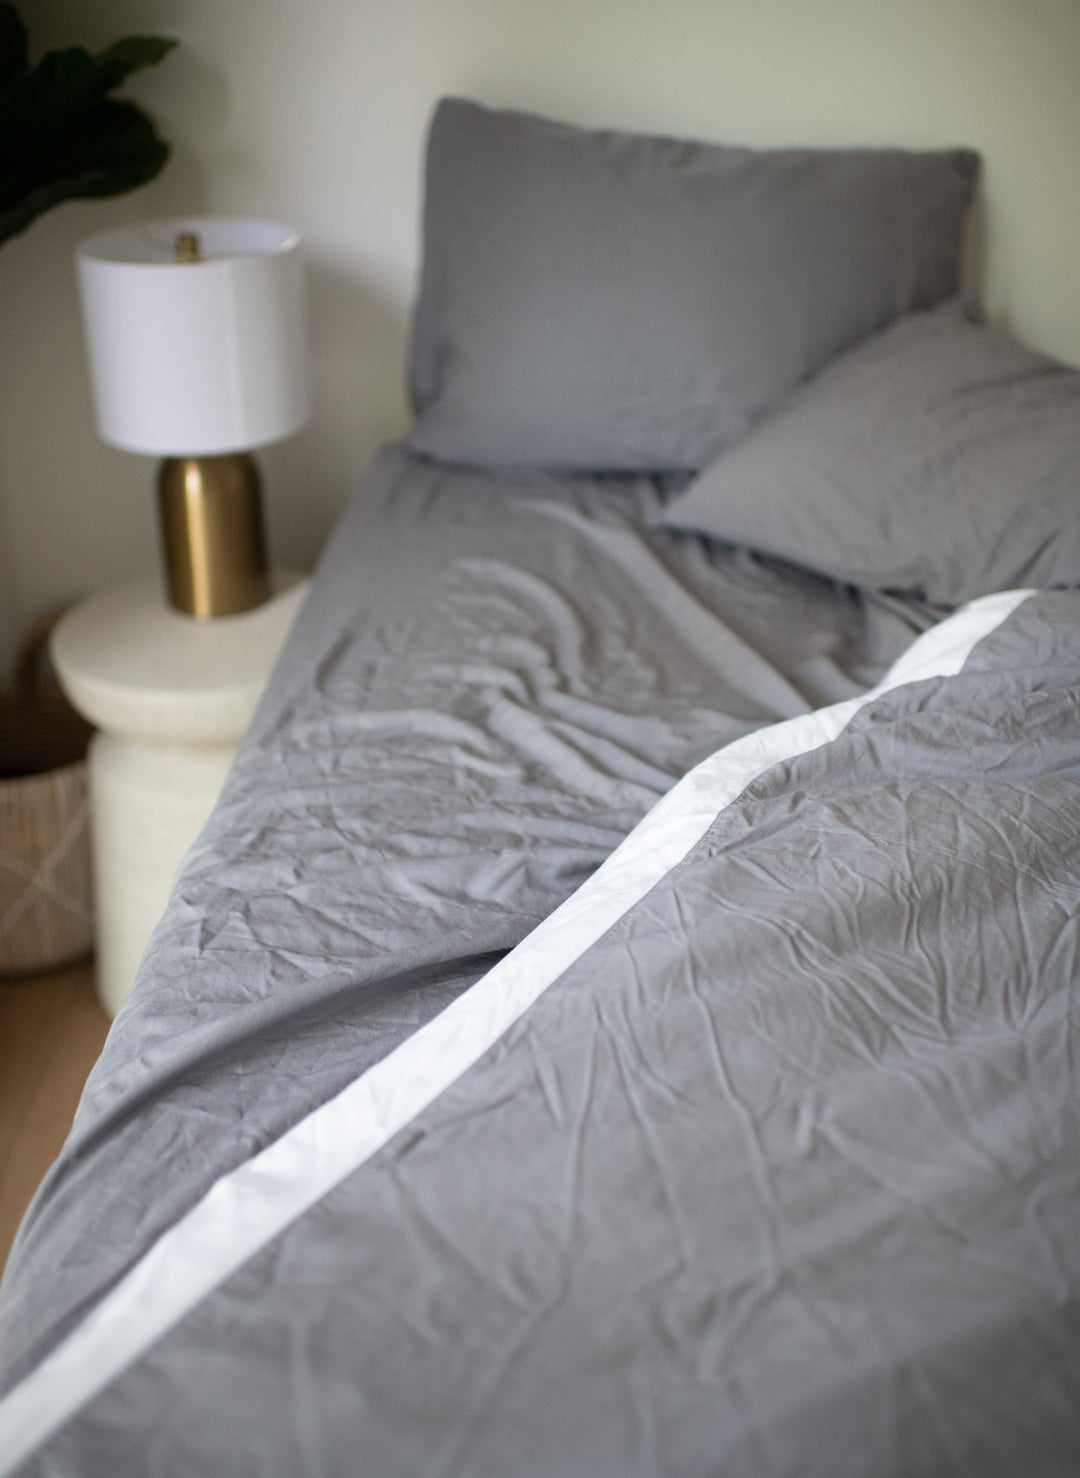 bamboo sheets in dark gray on a bed showing slight wrinkles